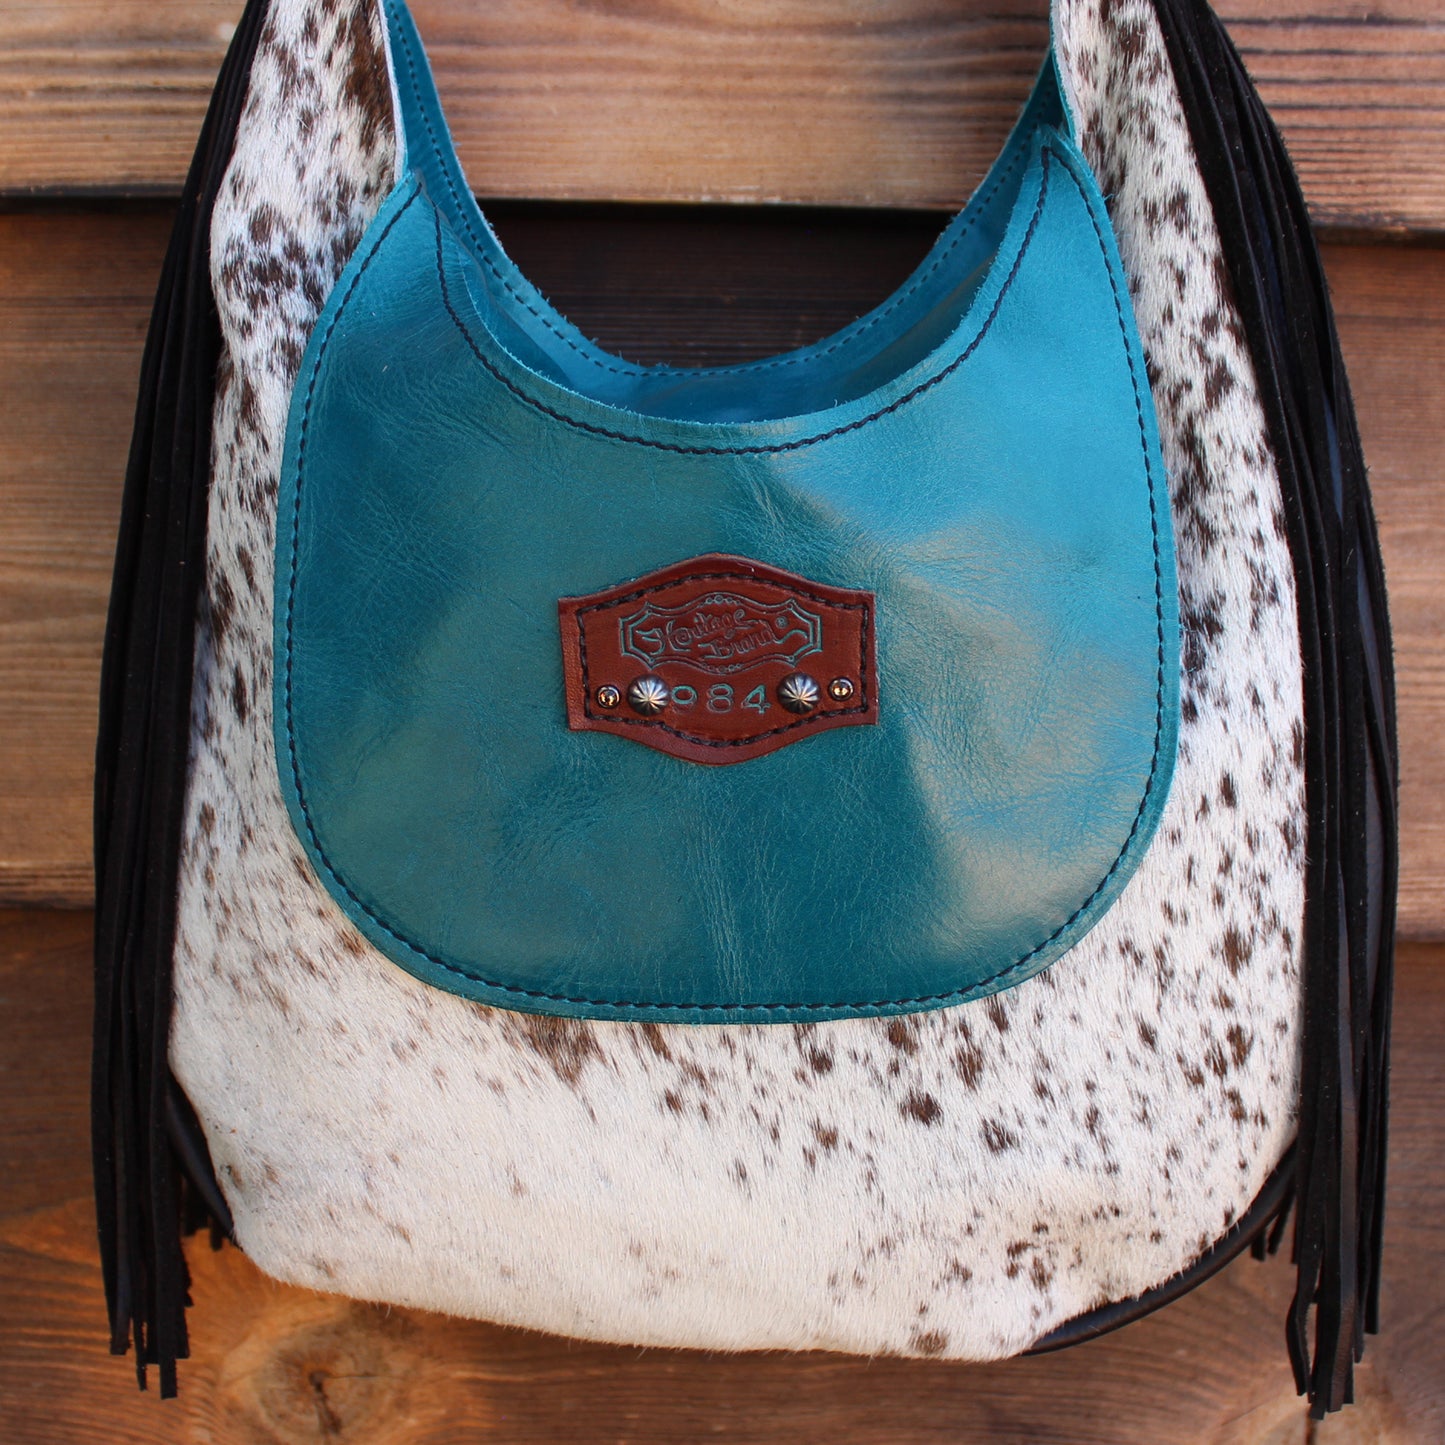 
                  
                    Blue and white leather "Marilyn Bag #984" handbag with fringe and cowhide pattern by Heritage Brand.
                  
                